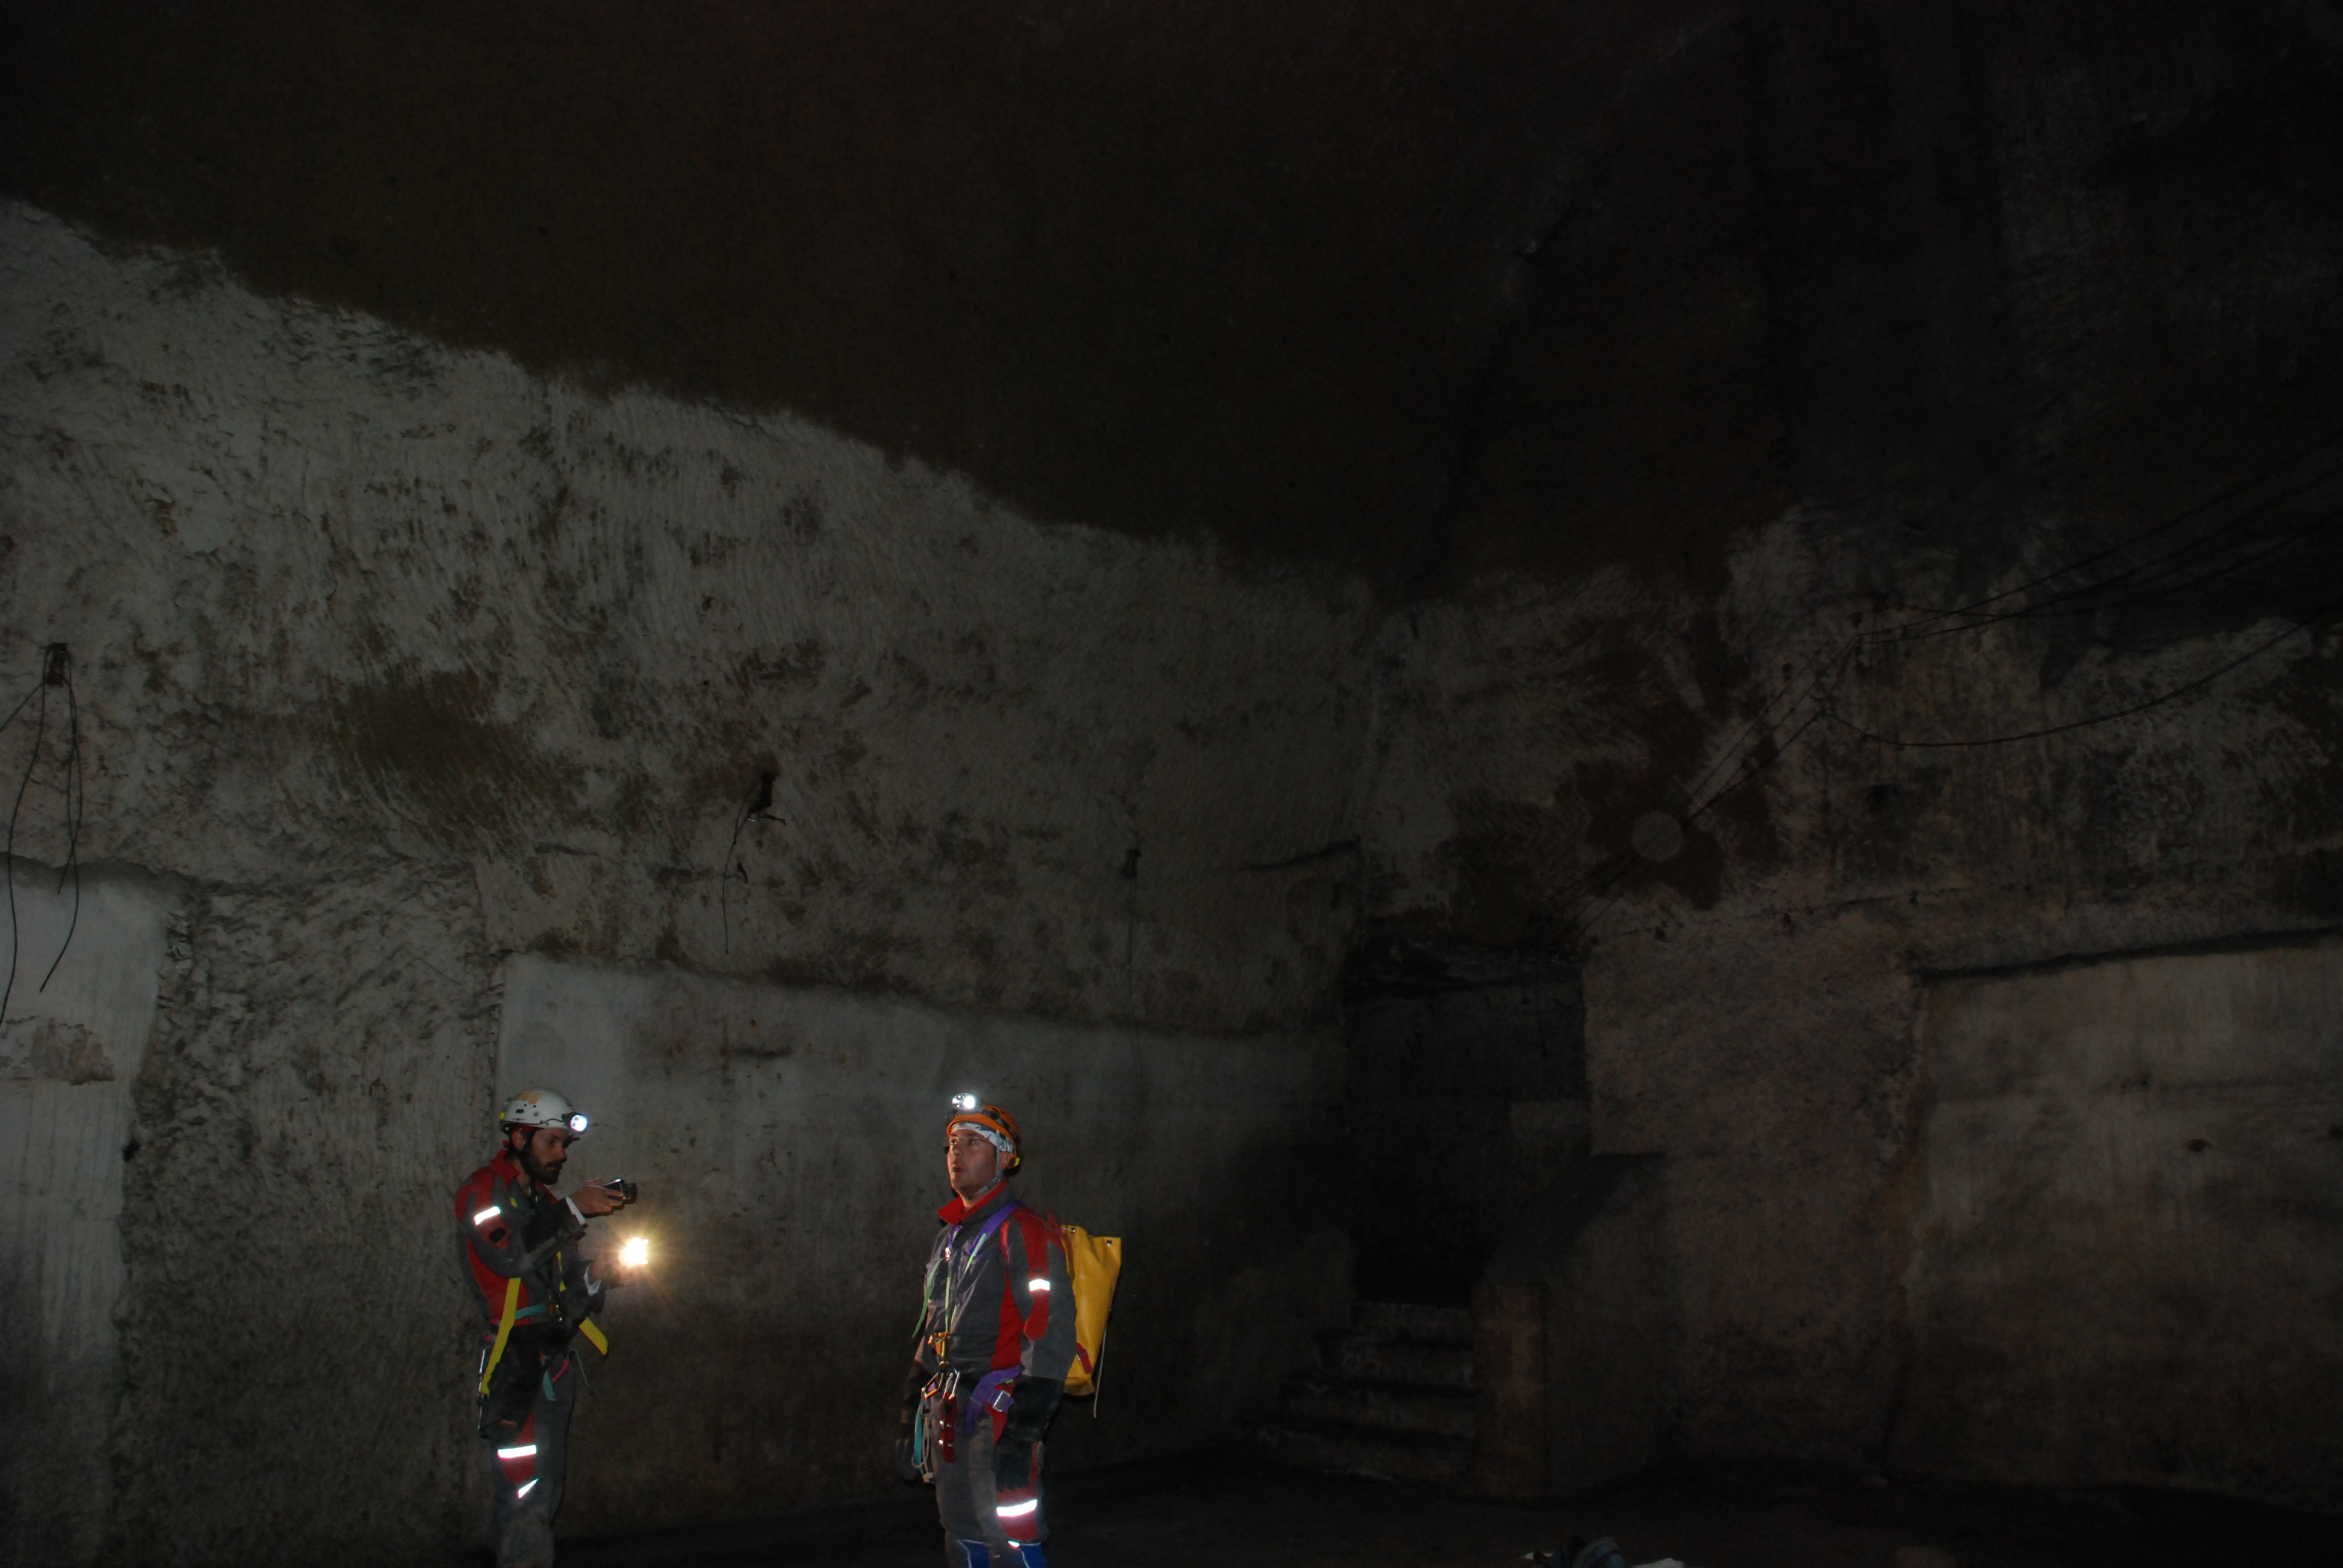 Checking out the Cisterns under Naples